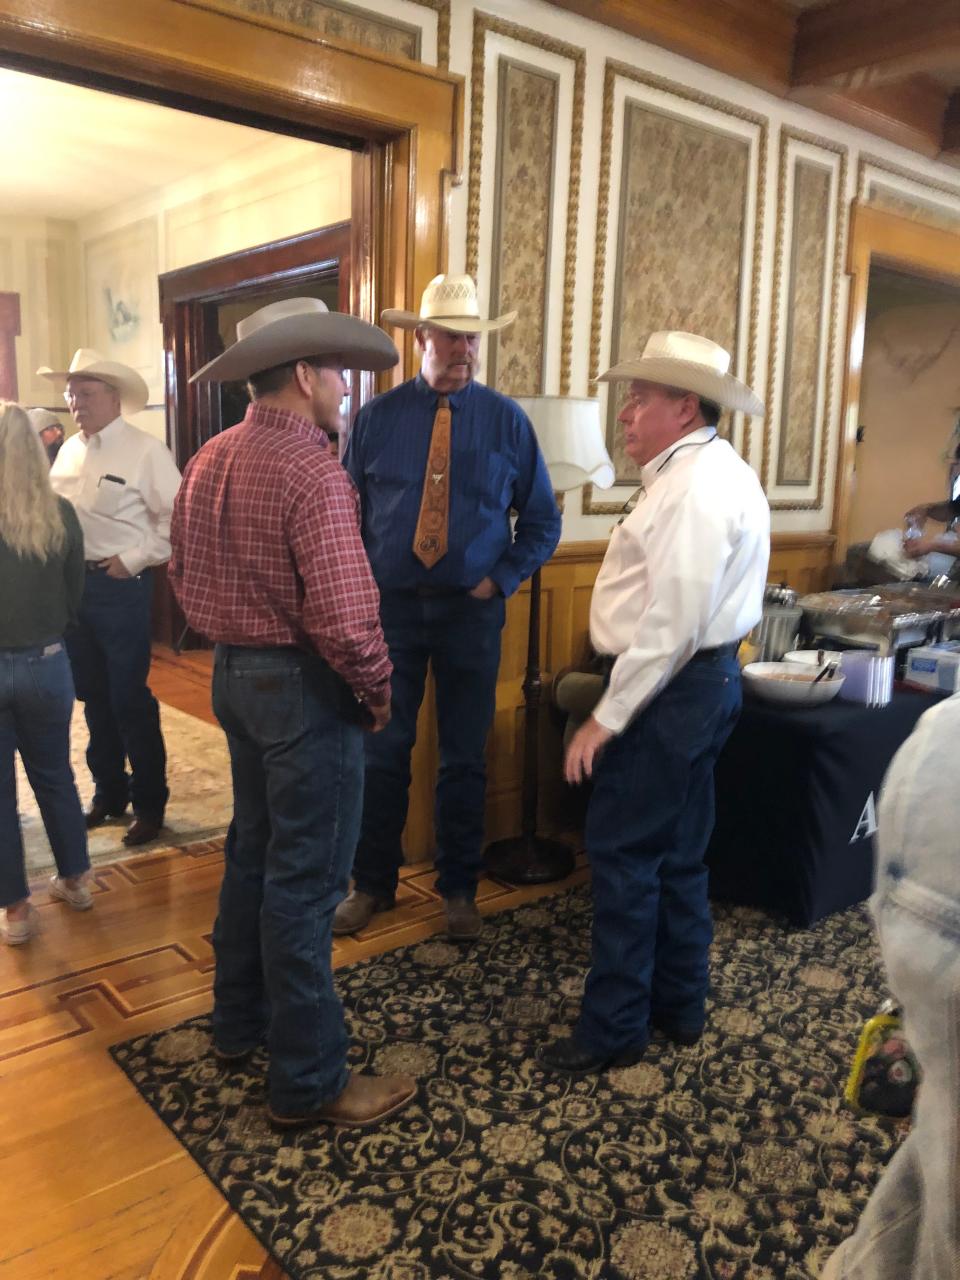 Ranchers, sponsors of WRCA and fans of rodeo gathered at the Bivins home to celebrate news of having three rodeos in 2024 at the Amarillo National Center on the Tri-State Fairgrounds. The events are scheduled for April, June and November.